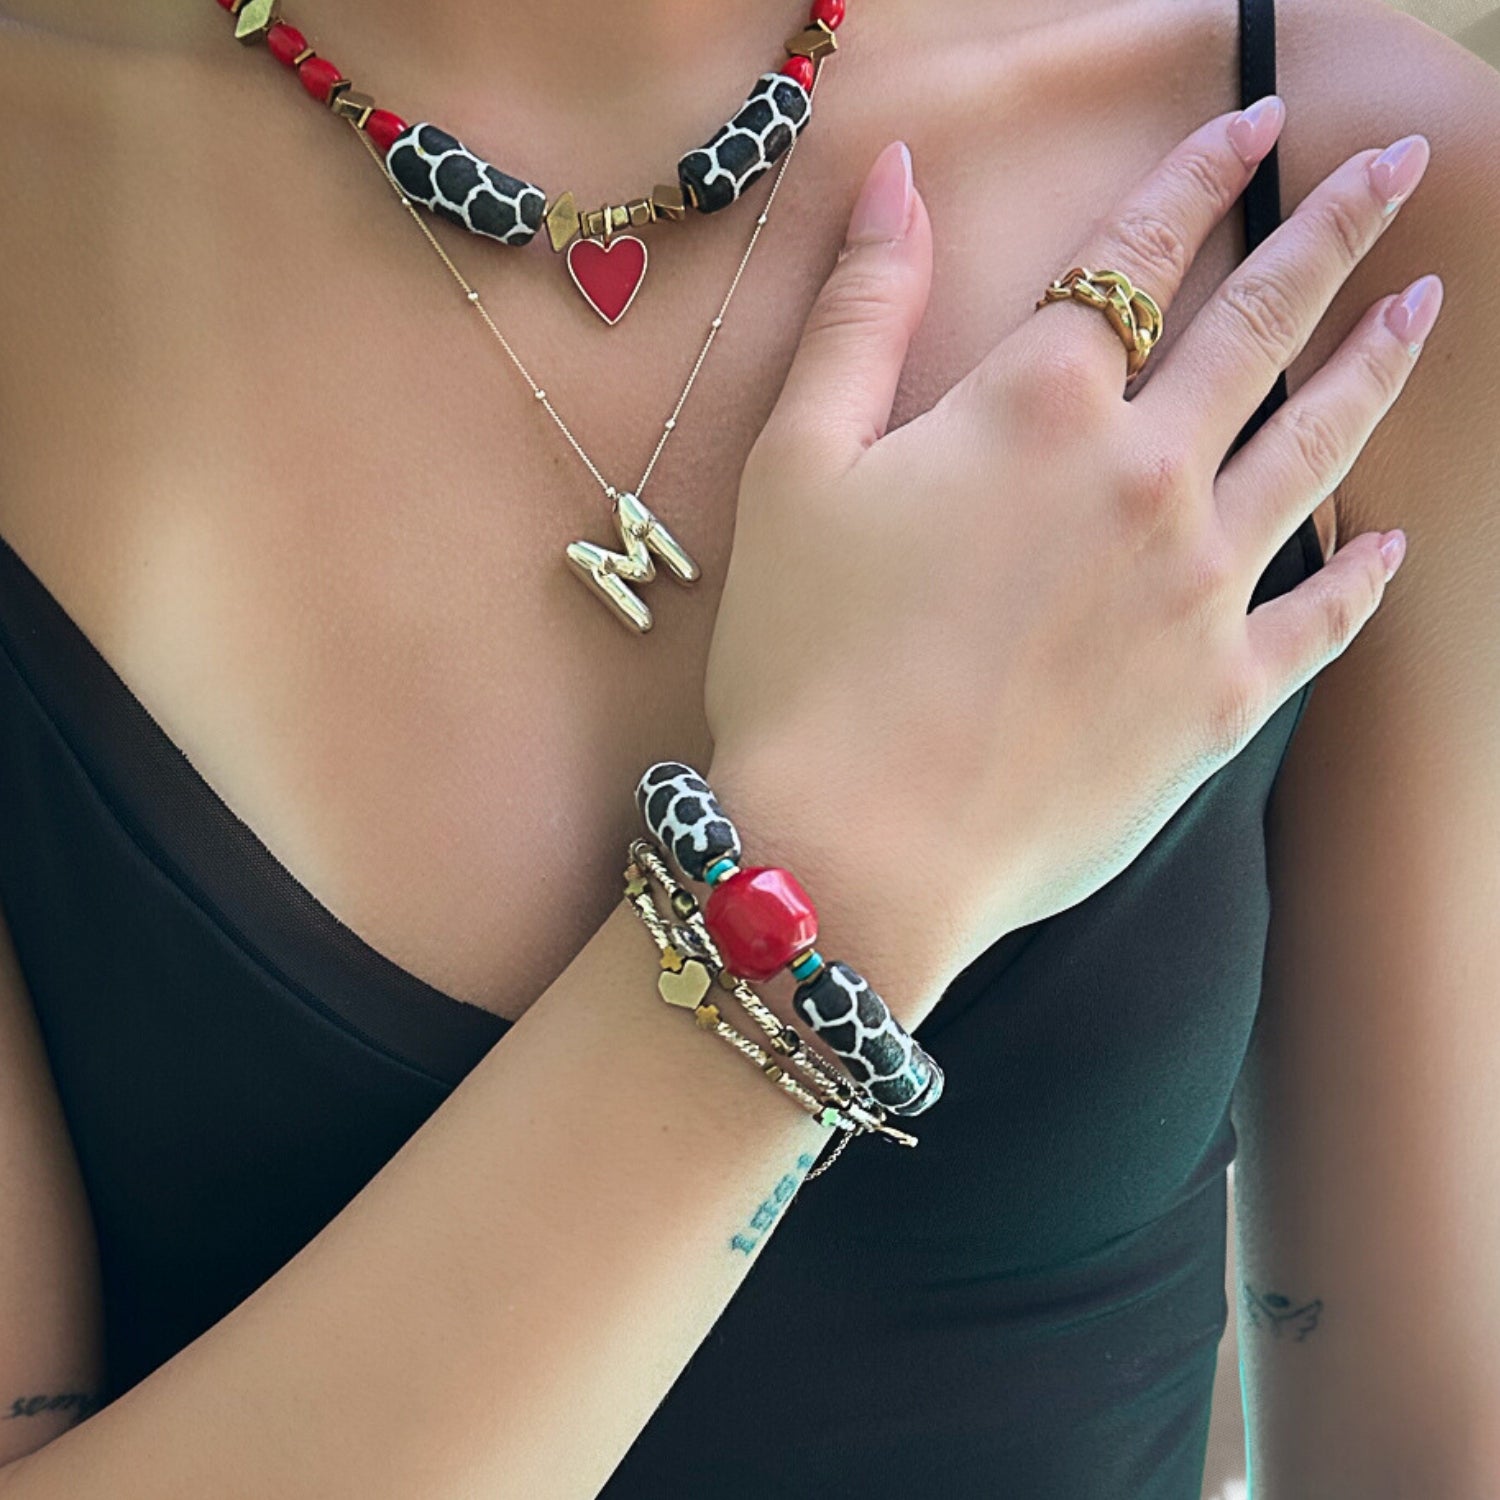 Model wearing the African Zebra Red Bracelet, showcasing its striking design and vibrant colors.